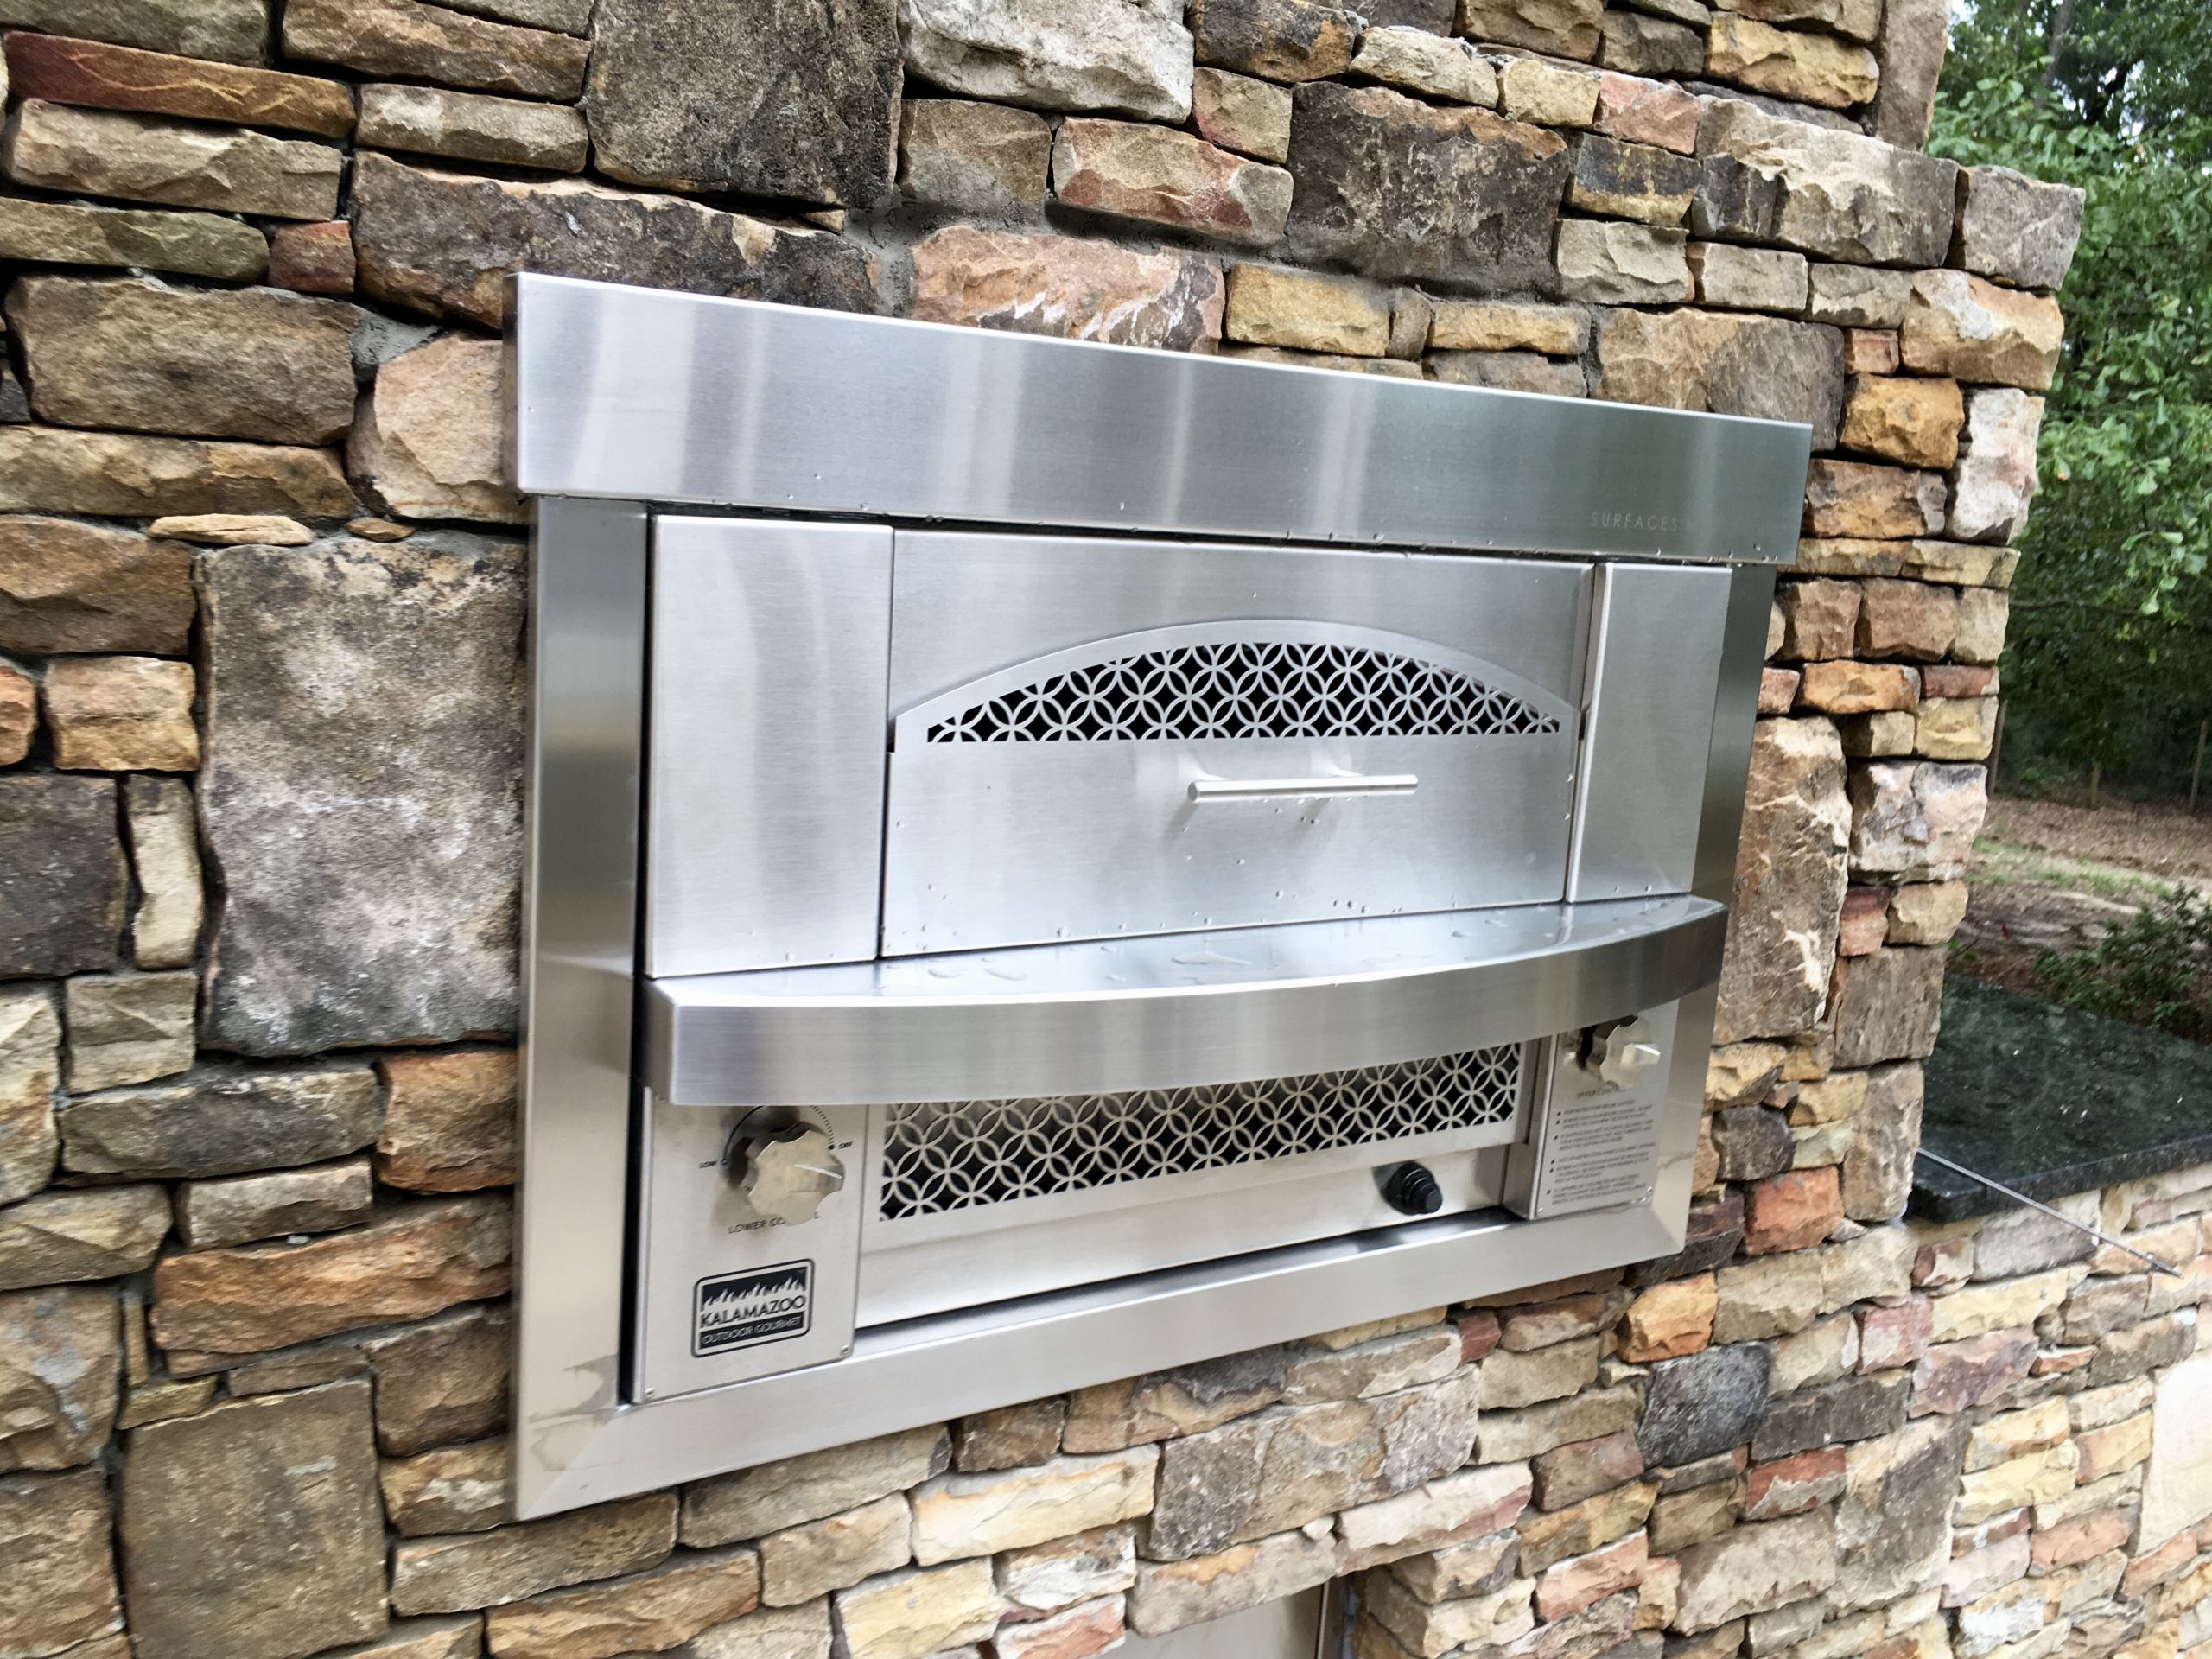 Outdoor Kitchen Pizza Oven
 Outdoor Kitchen Built in Gas Pizza Oven Fireside